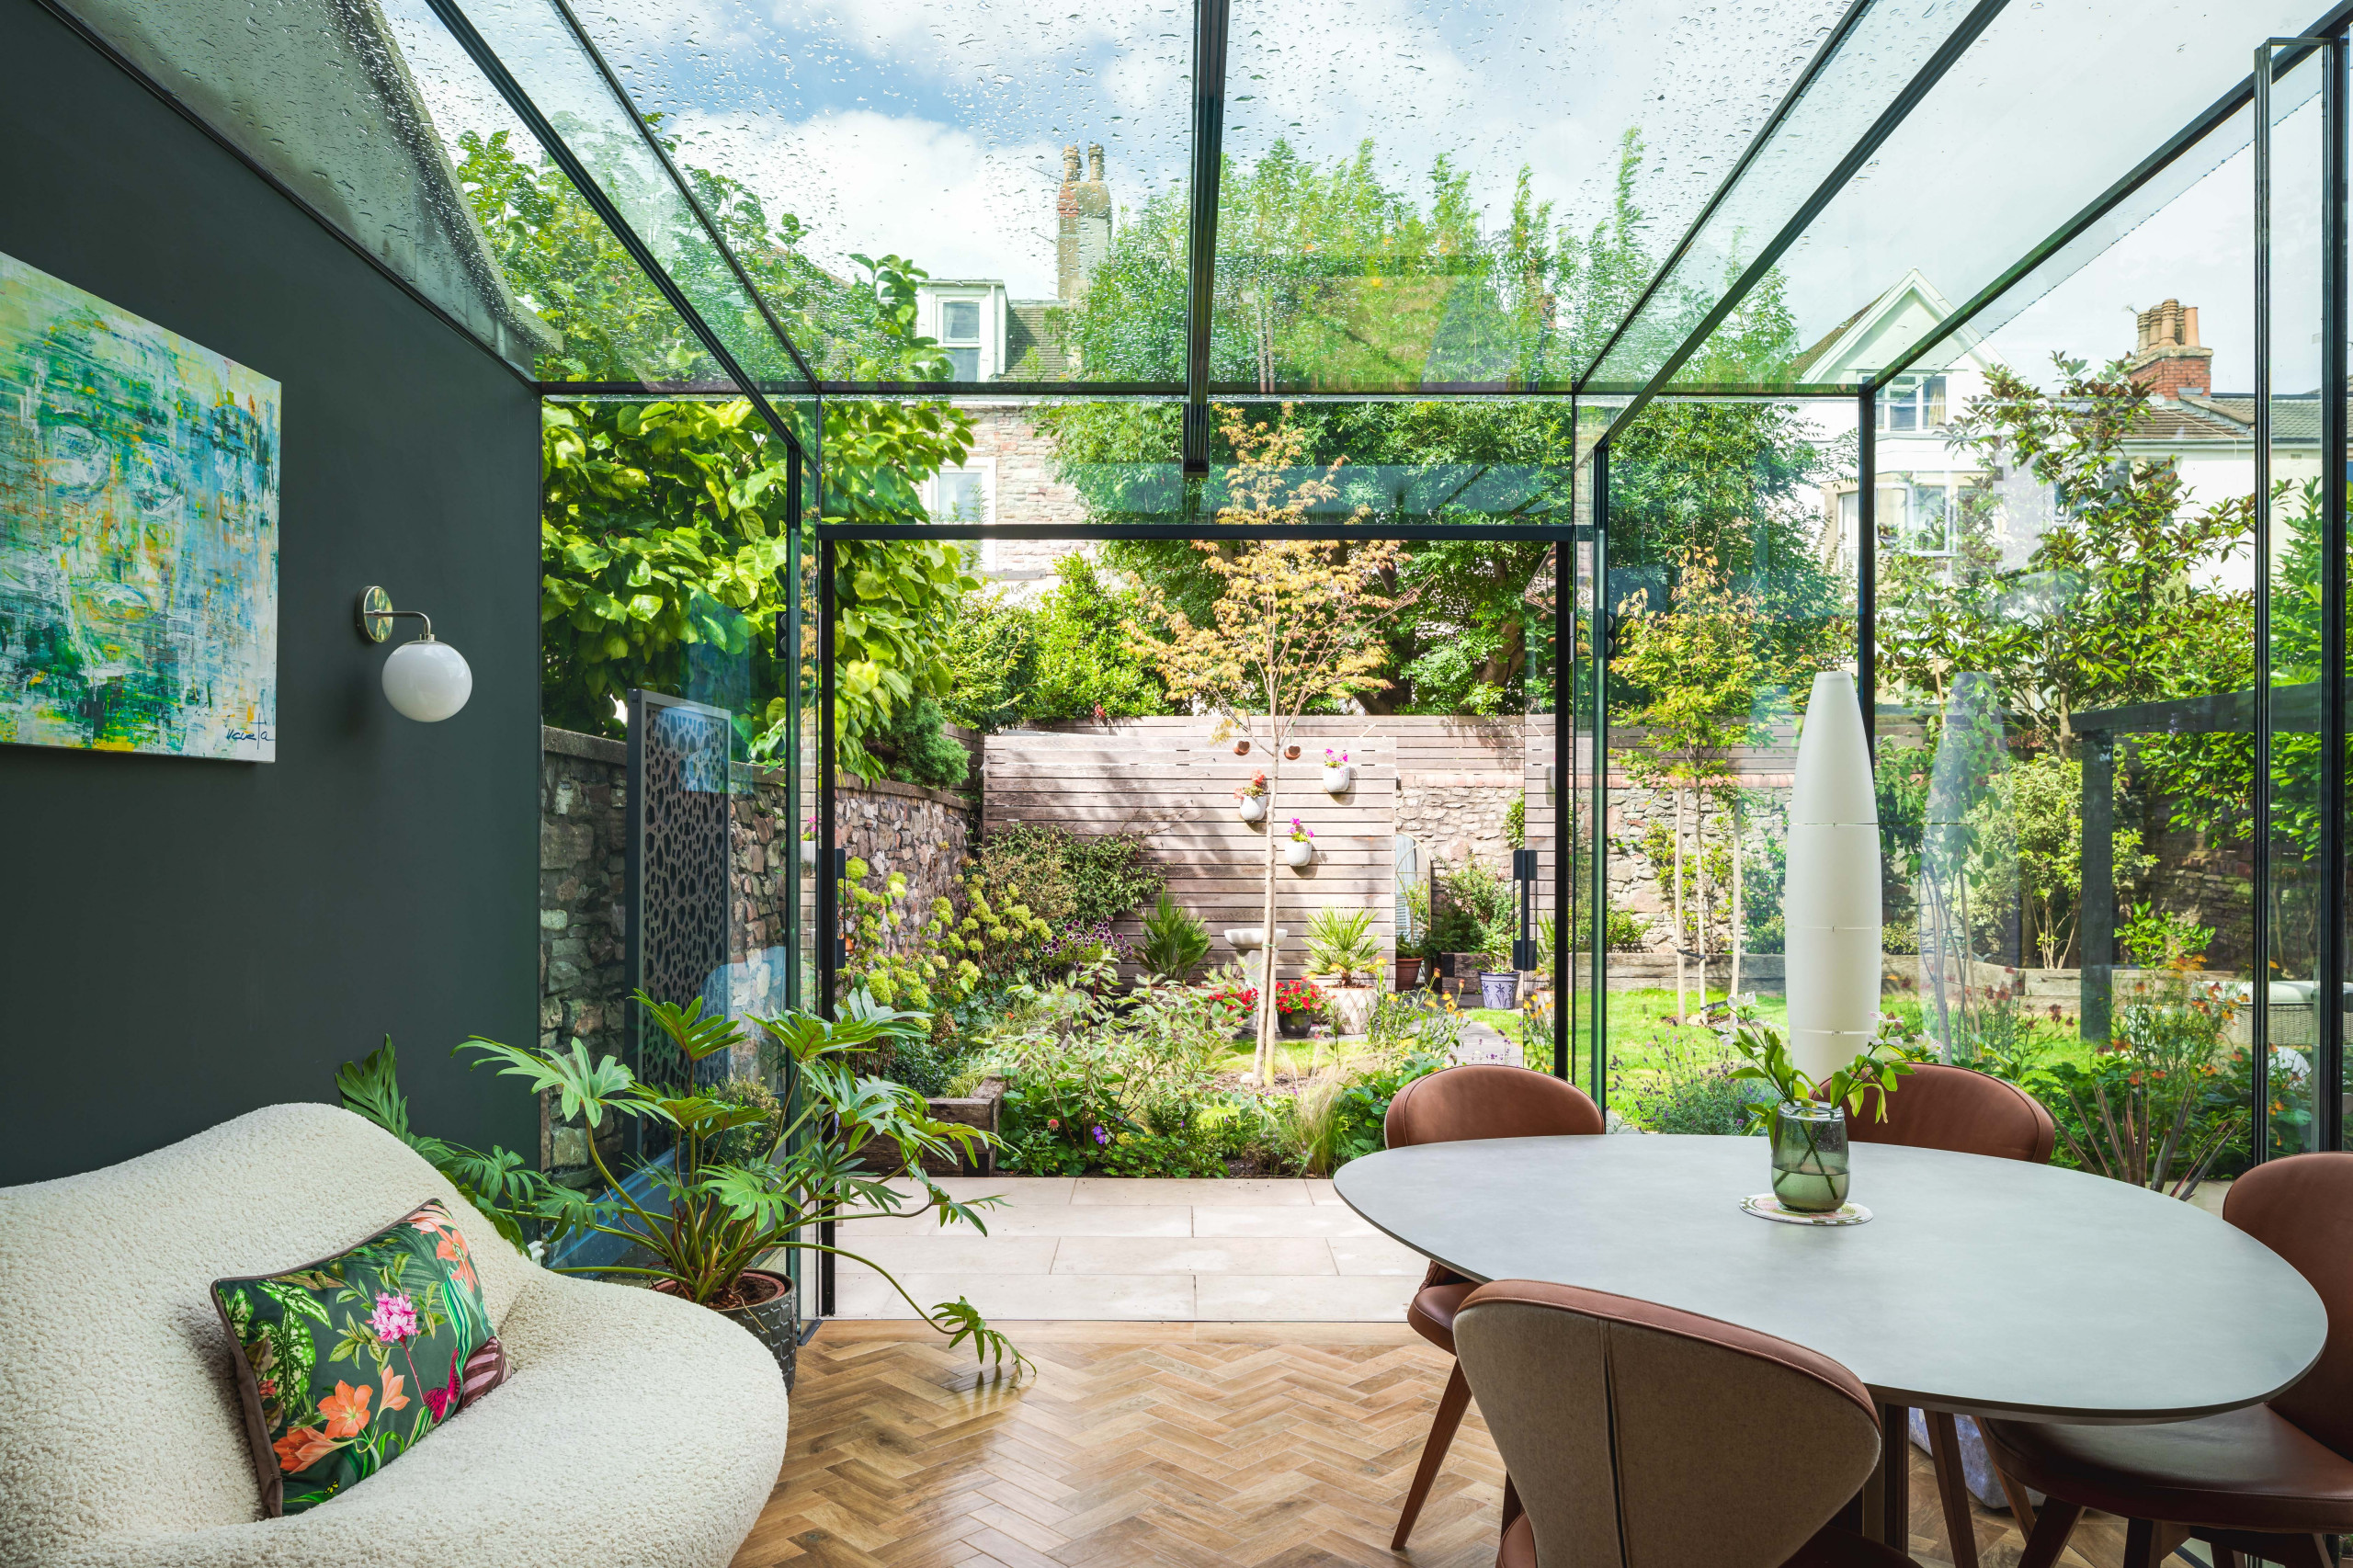 Stylish & Modern Conservatories for the East Midlands | Stormclad